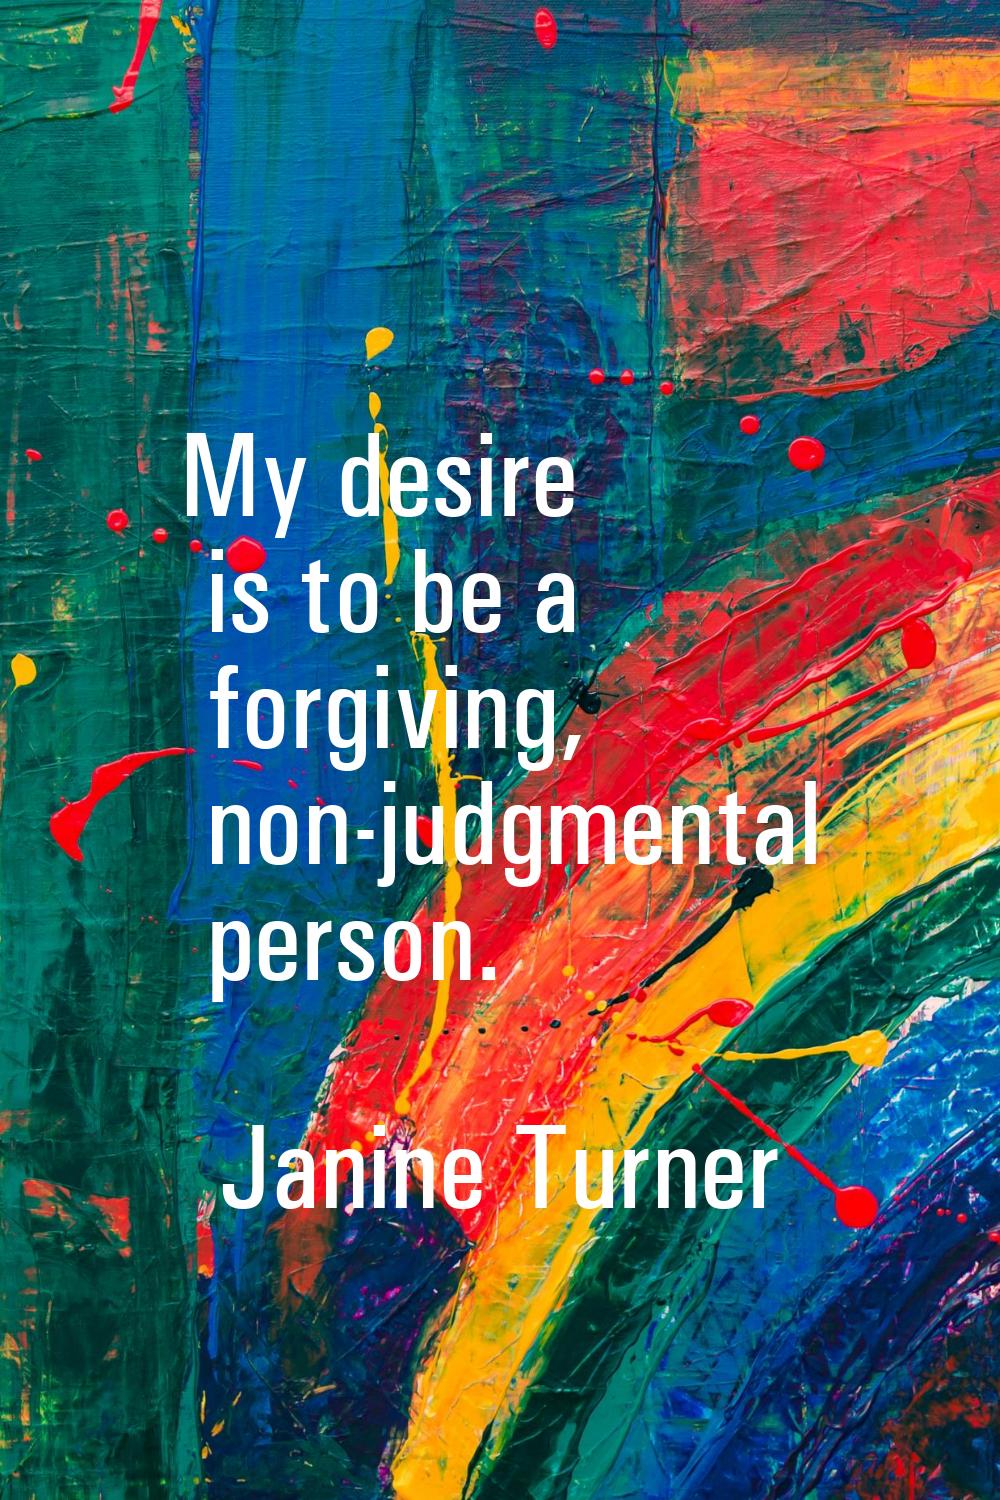 My desire is to be a forgiving, non-judgmental person.